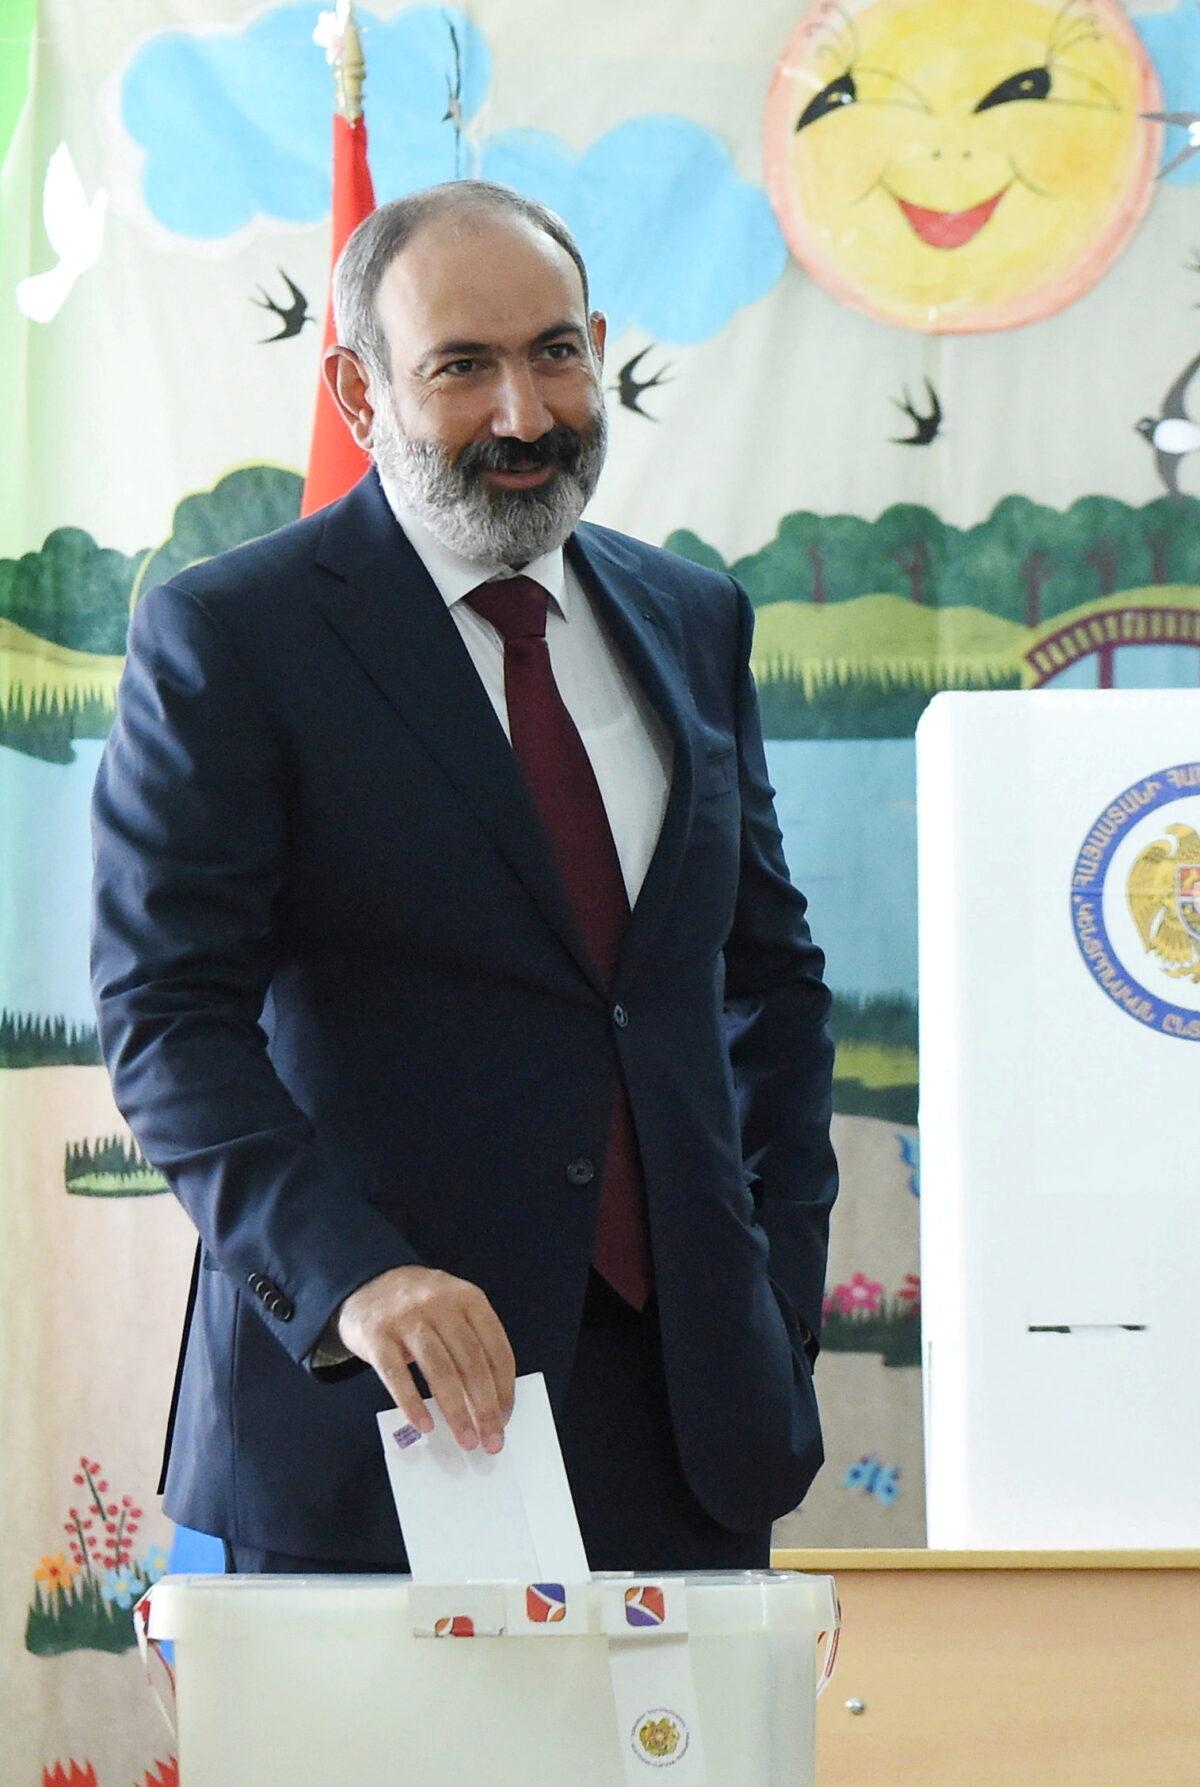 Armenia's acting Prime Minister and leader of Civil Contract party Nikol Pashinyan casts his vote at a polling station during the snap parliamentary election in Yerevan, Armenia, on June 20, 2021. (Lusi Sargsyan/Photolure via Reuters)